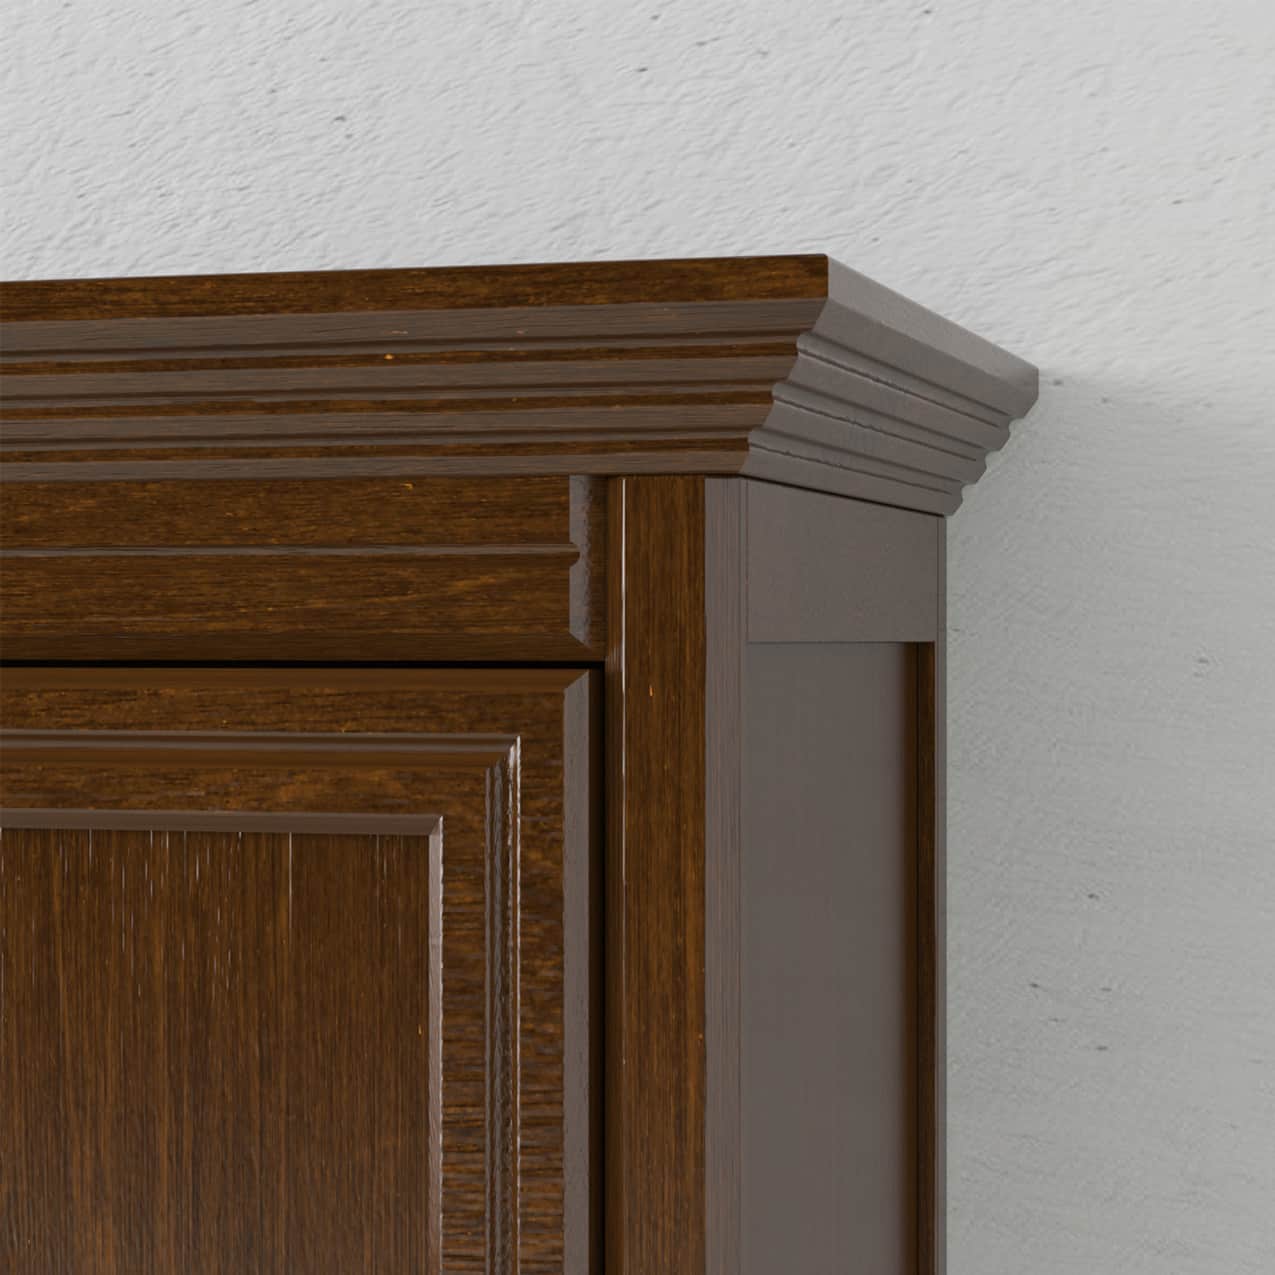 chamberlin queen murphy bed closeup of solid wood top molding hidden hidaway hide away hide-a-way diy murphy bed kit pull down fold out wall bed cabinet